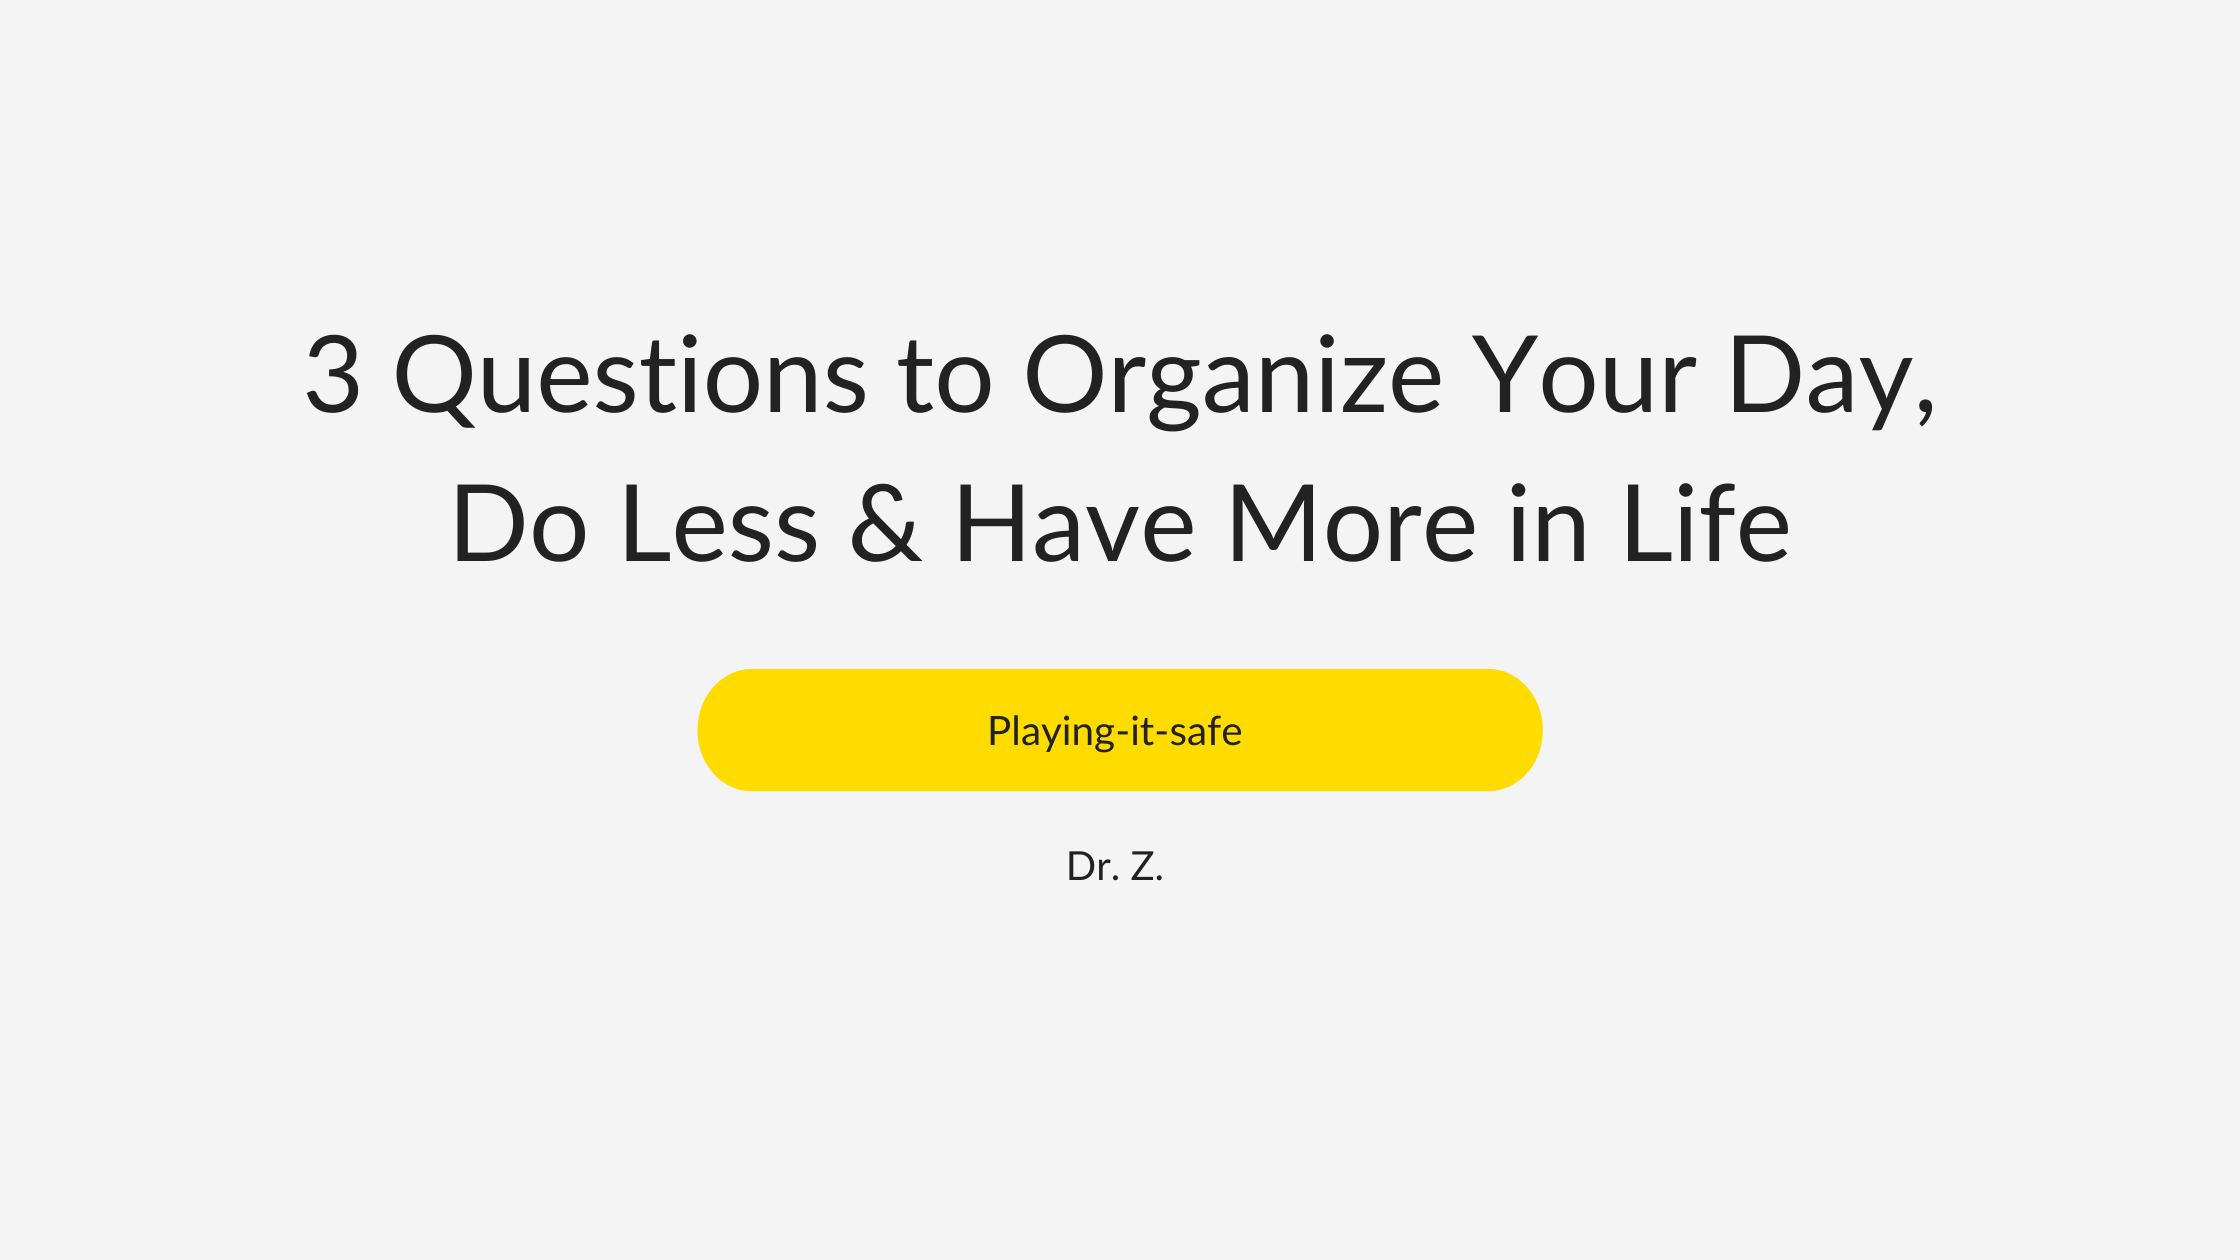 3-questions-to-organize-your-day-do-less-have-more-in-life-dr-z